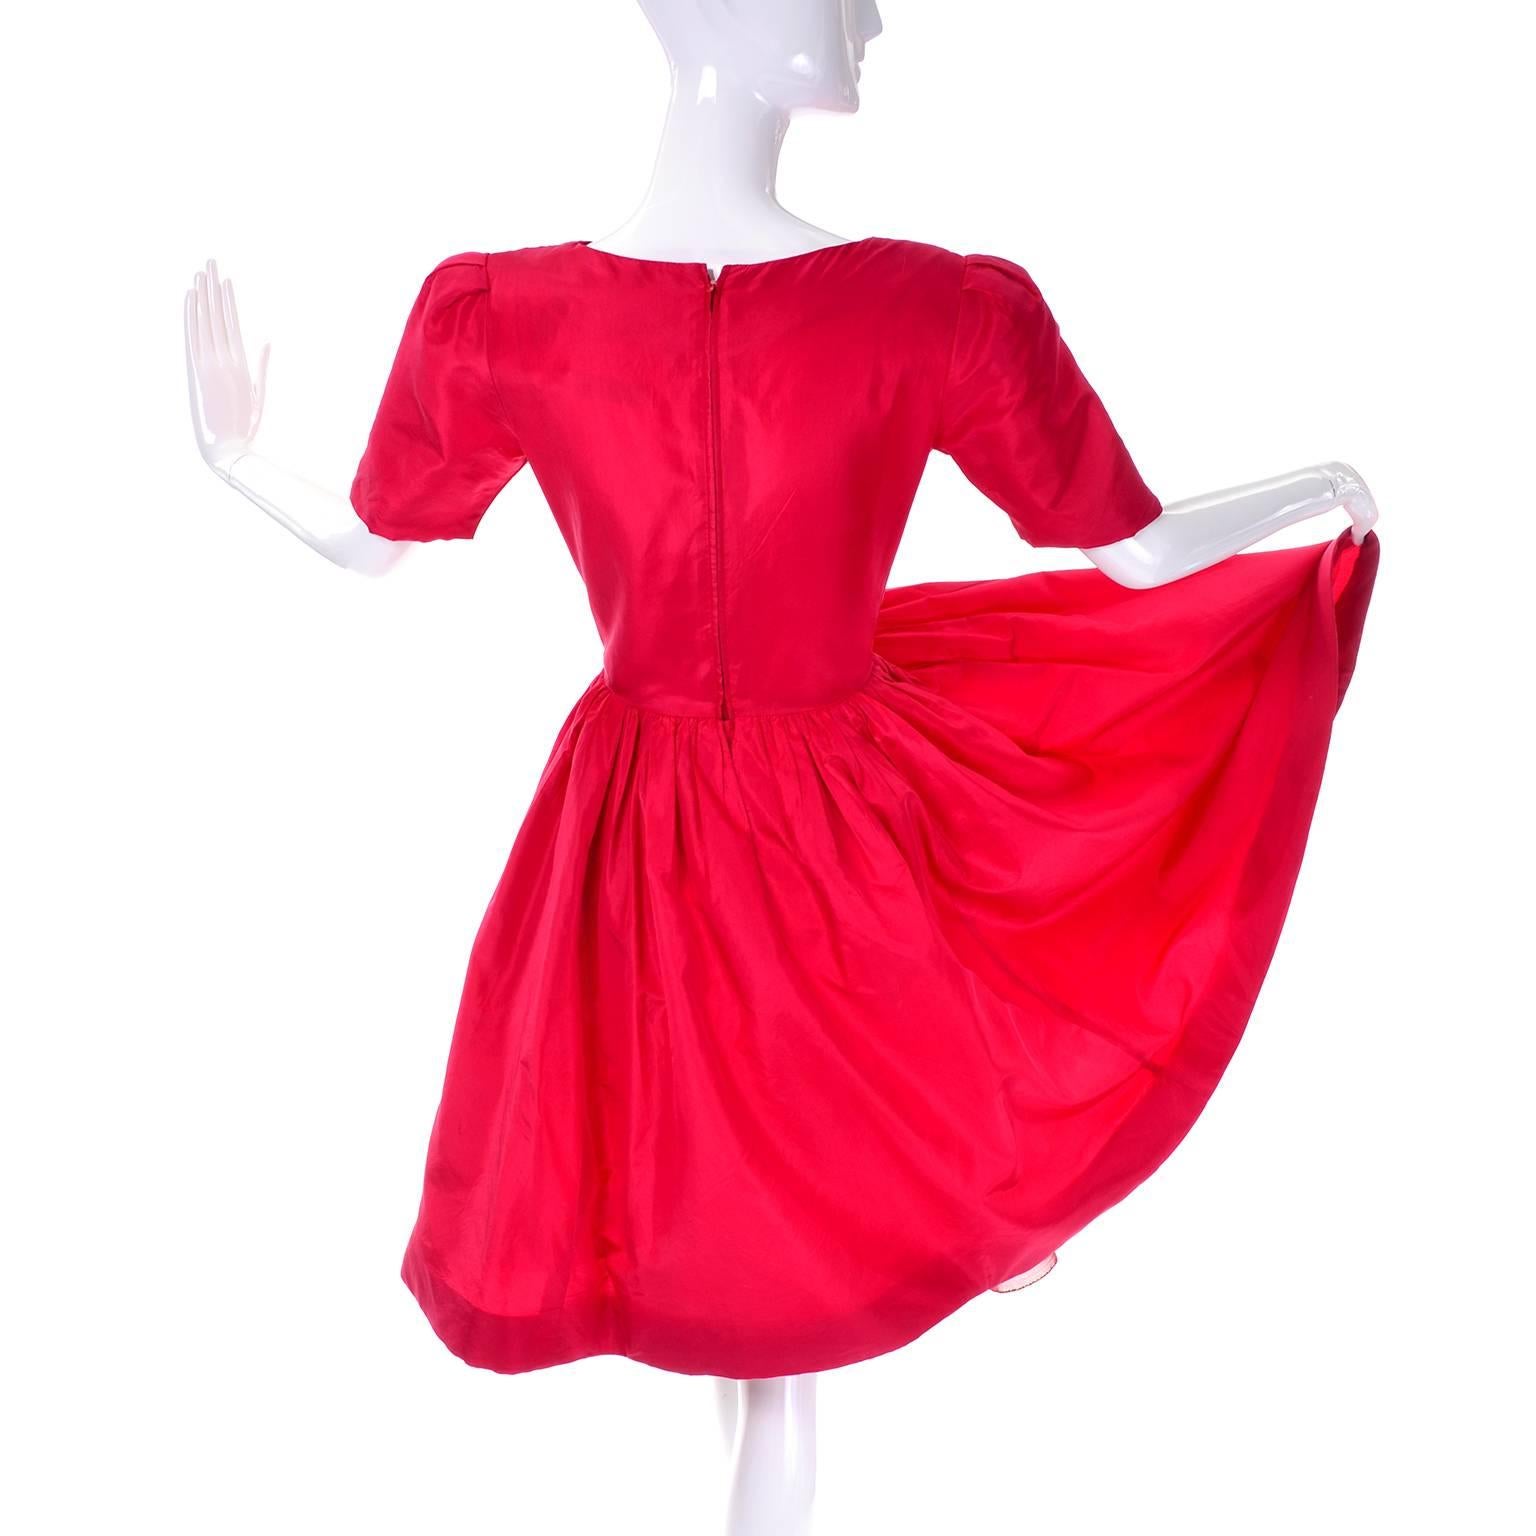 Miss O by Oscar de la Renta vintage red dress purchased at Bonwit Teller Designer Collections.  This 100% Silk dress is labeled a size 4 and has a full skirt. The dress is lined in a fine gauze in the bodice, and has an underskirt to accentuate the